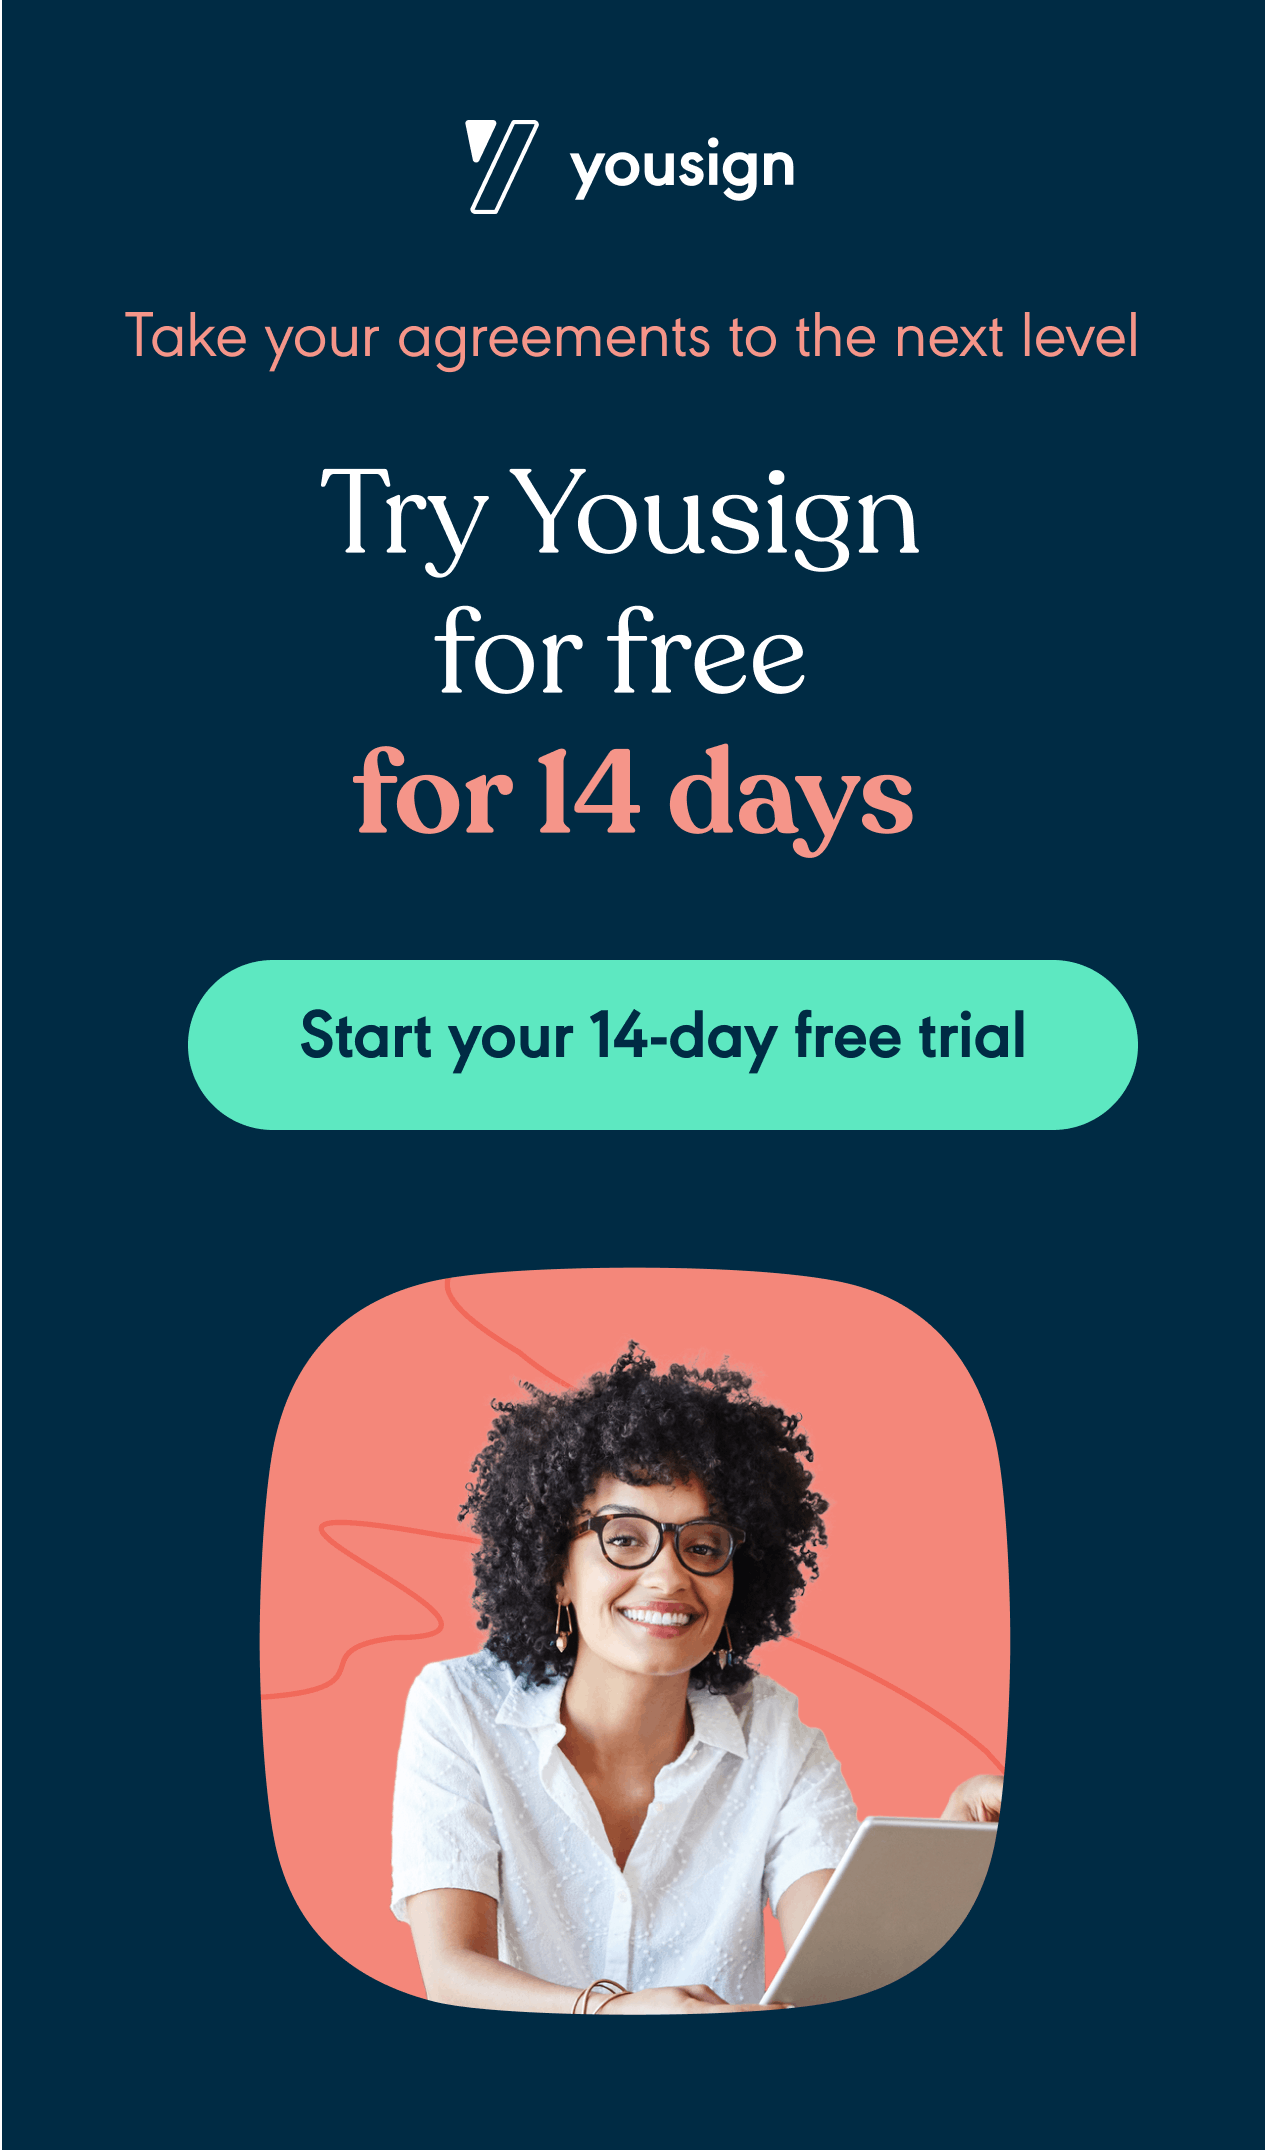 Try Yousign for free for 14 days